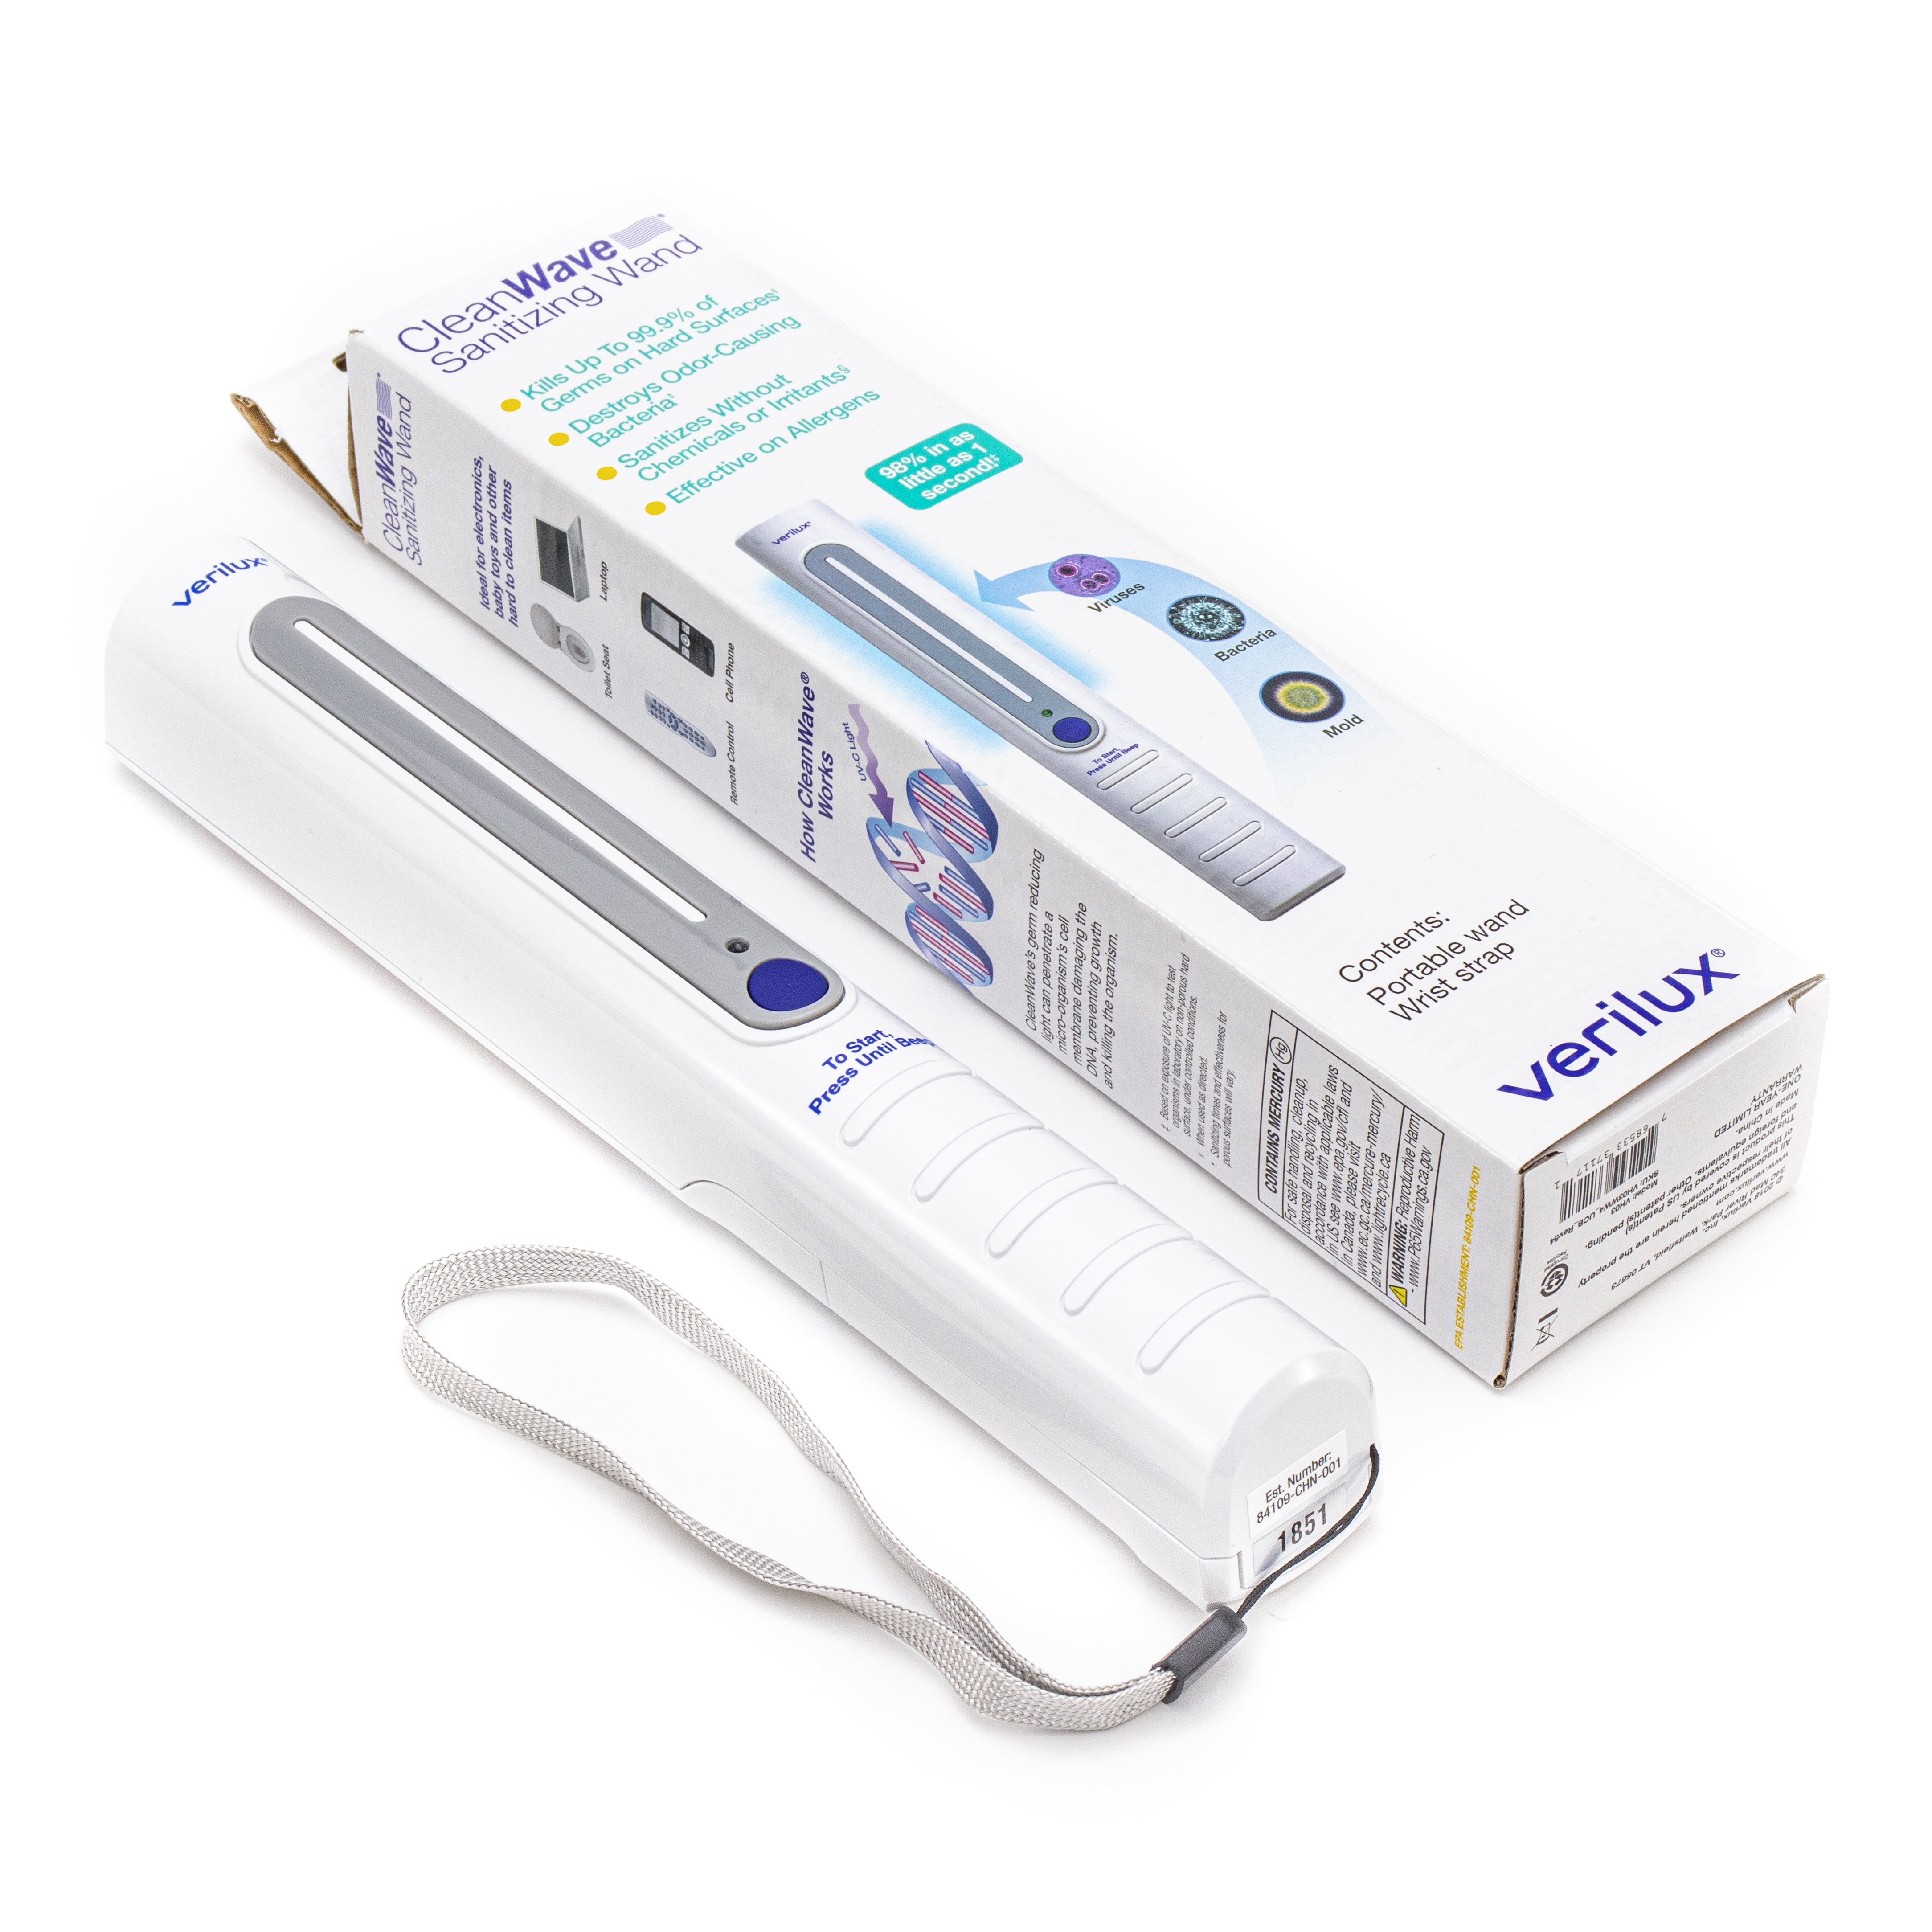 Verilux CleanWave Portable Sanitizing Travel Wand with UV-C Technology - image 2 of 6